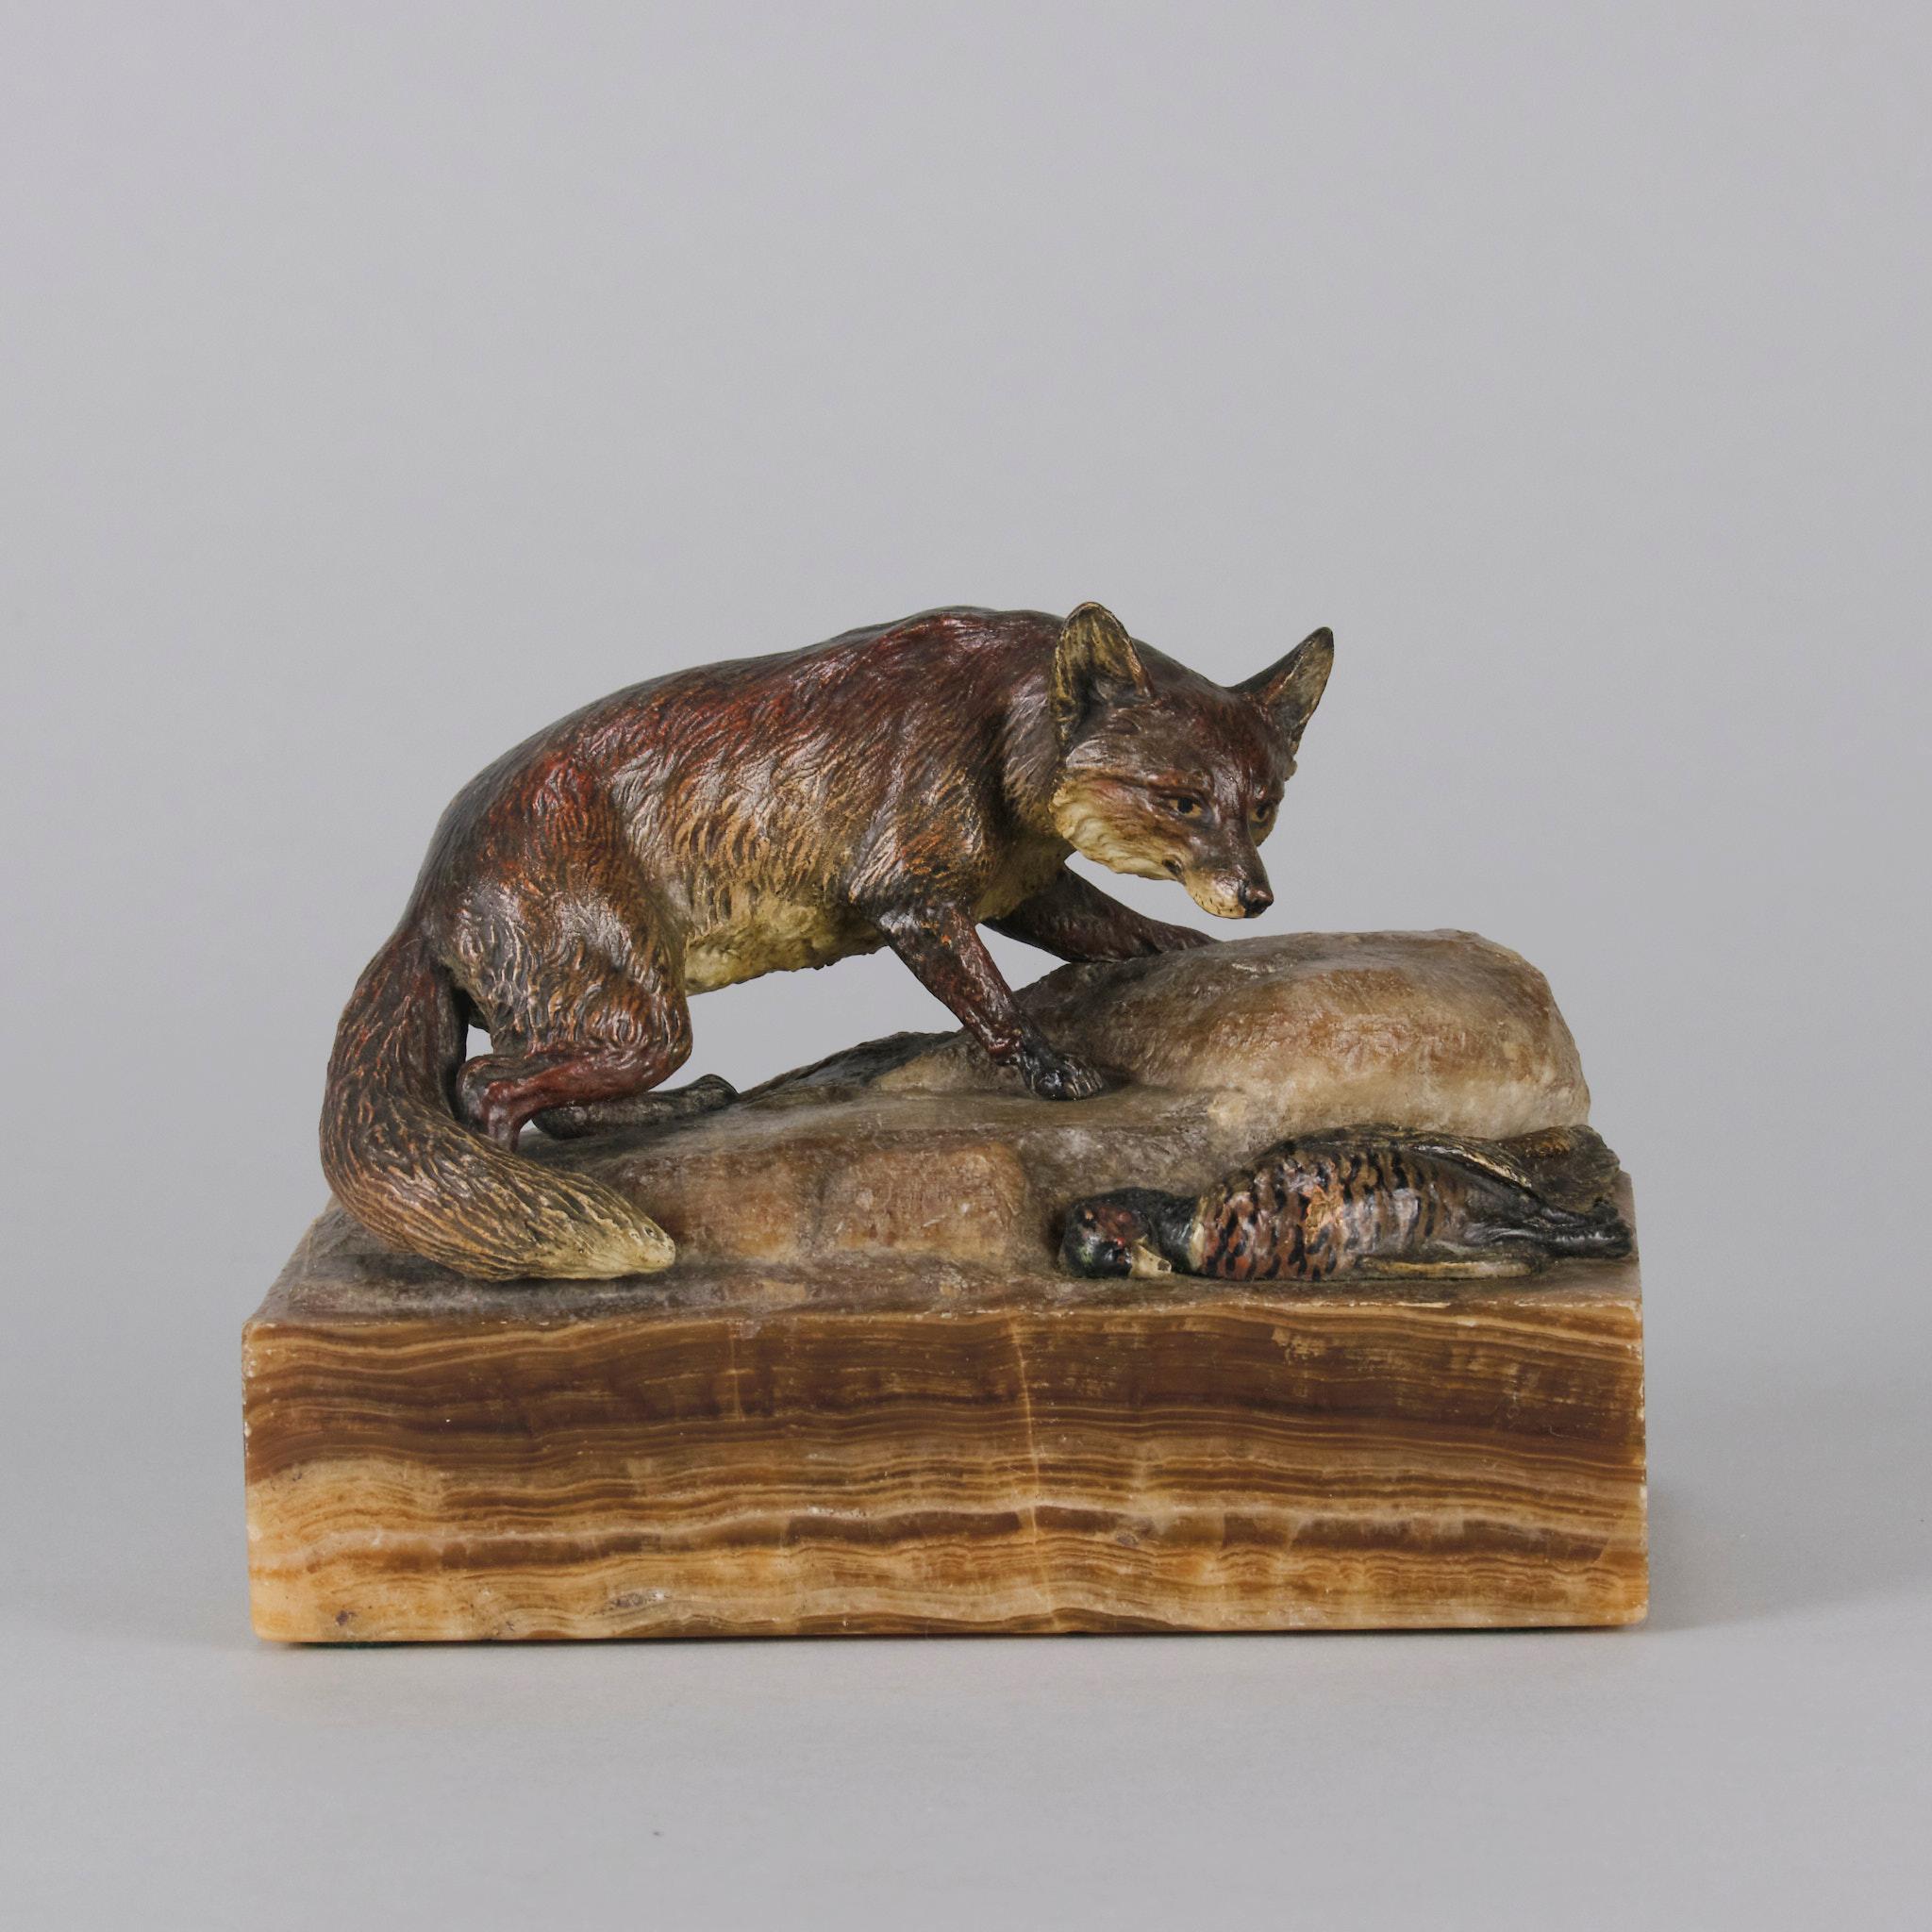 Very fine cold painted Austrian Bronze study of an alert fox standing upon higher ground checking its surroundings with its prey beside a rock. The bronze with excellent cold painted colours and very fine hand chased surface detail, raised on a